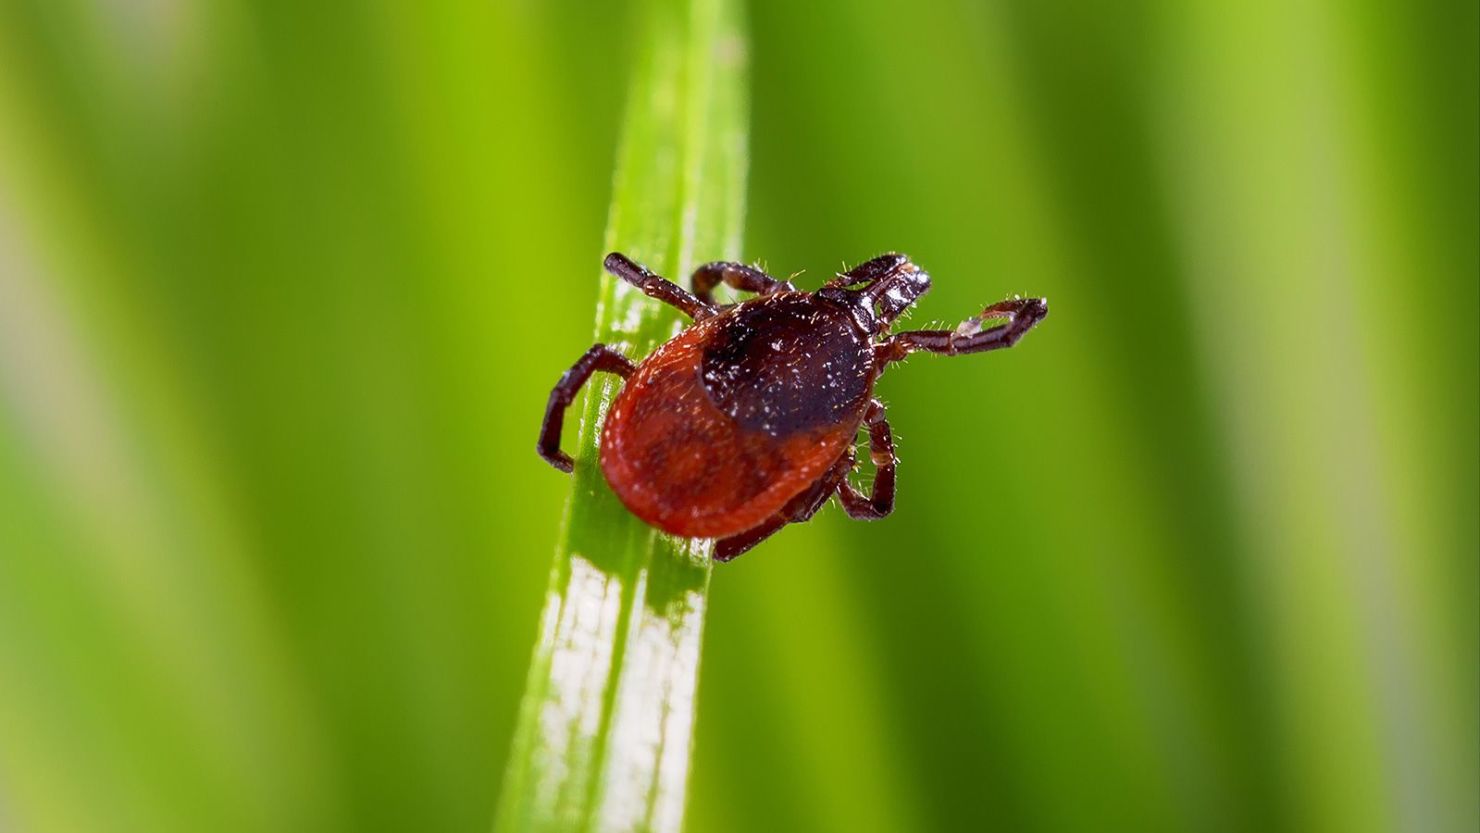 Some 84 species of ticks have been documented in the United States, with blacklegged ticks, also known as deer ticks, among the most common.